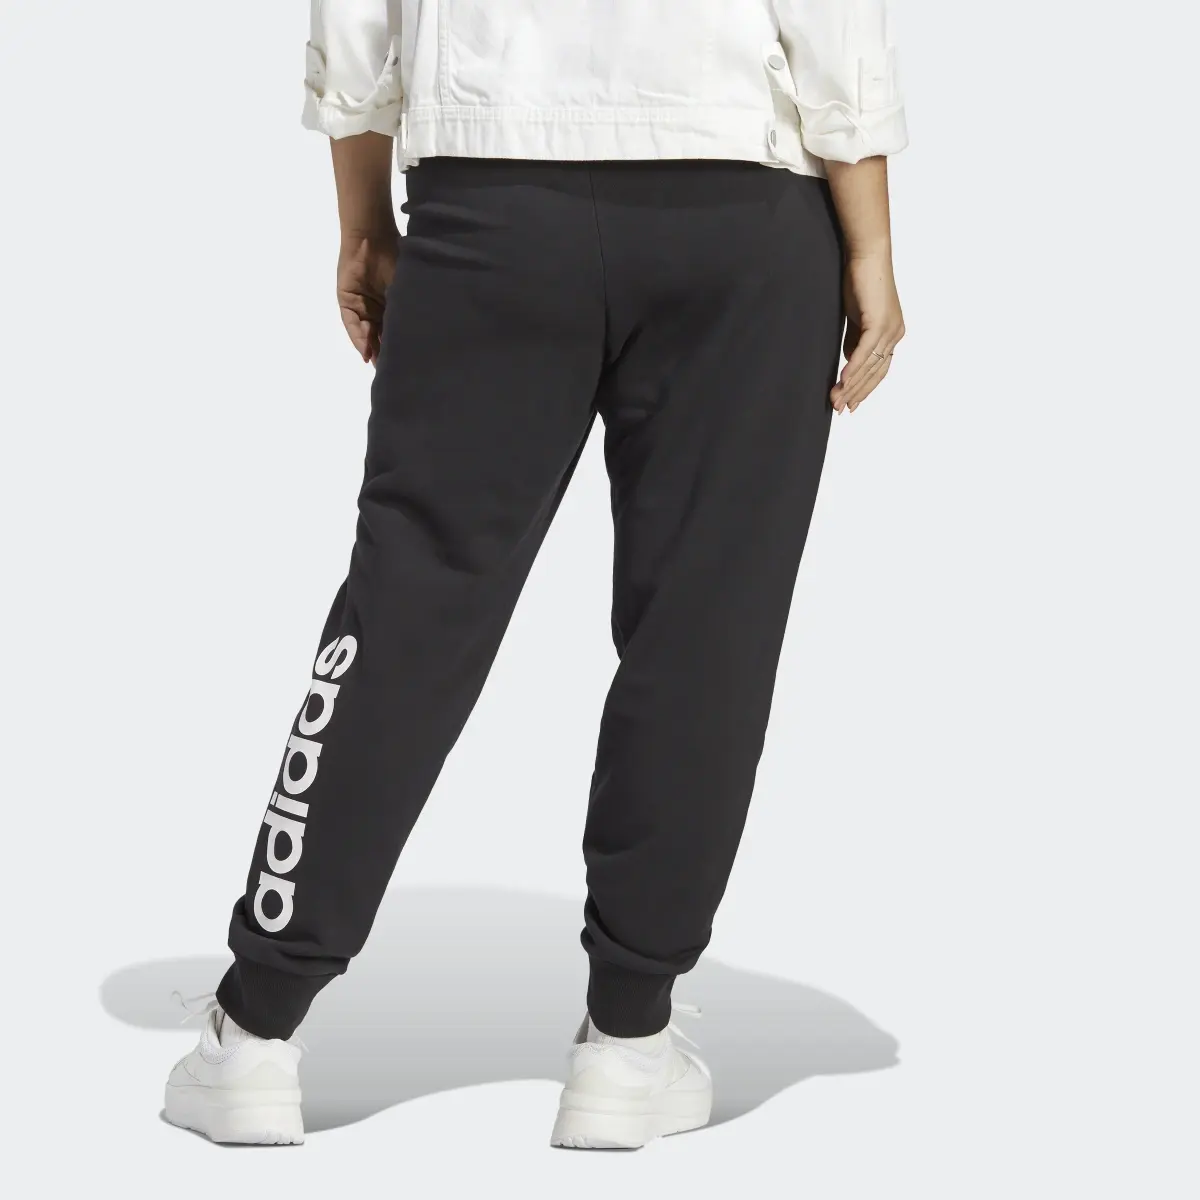 Adidas Essentials Linear French Terry Cuffed Pants (Plus Size). 2